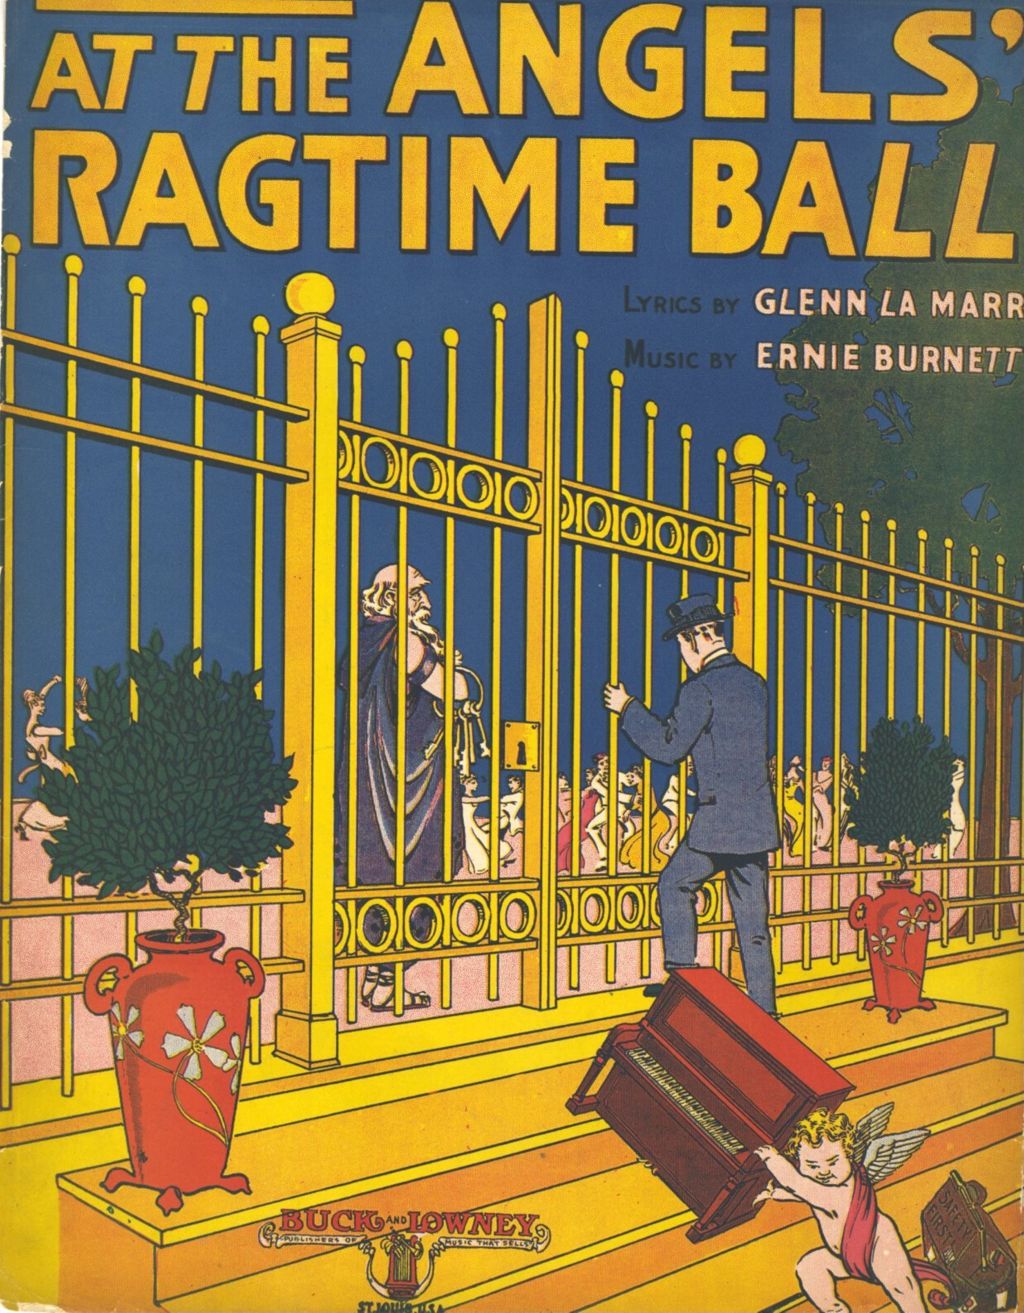 At the Angels' Ragttime Ball